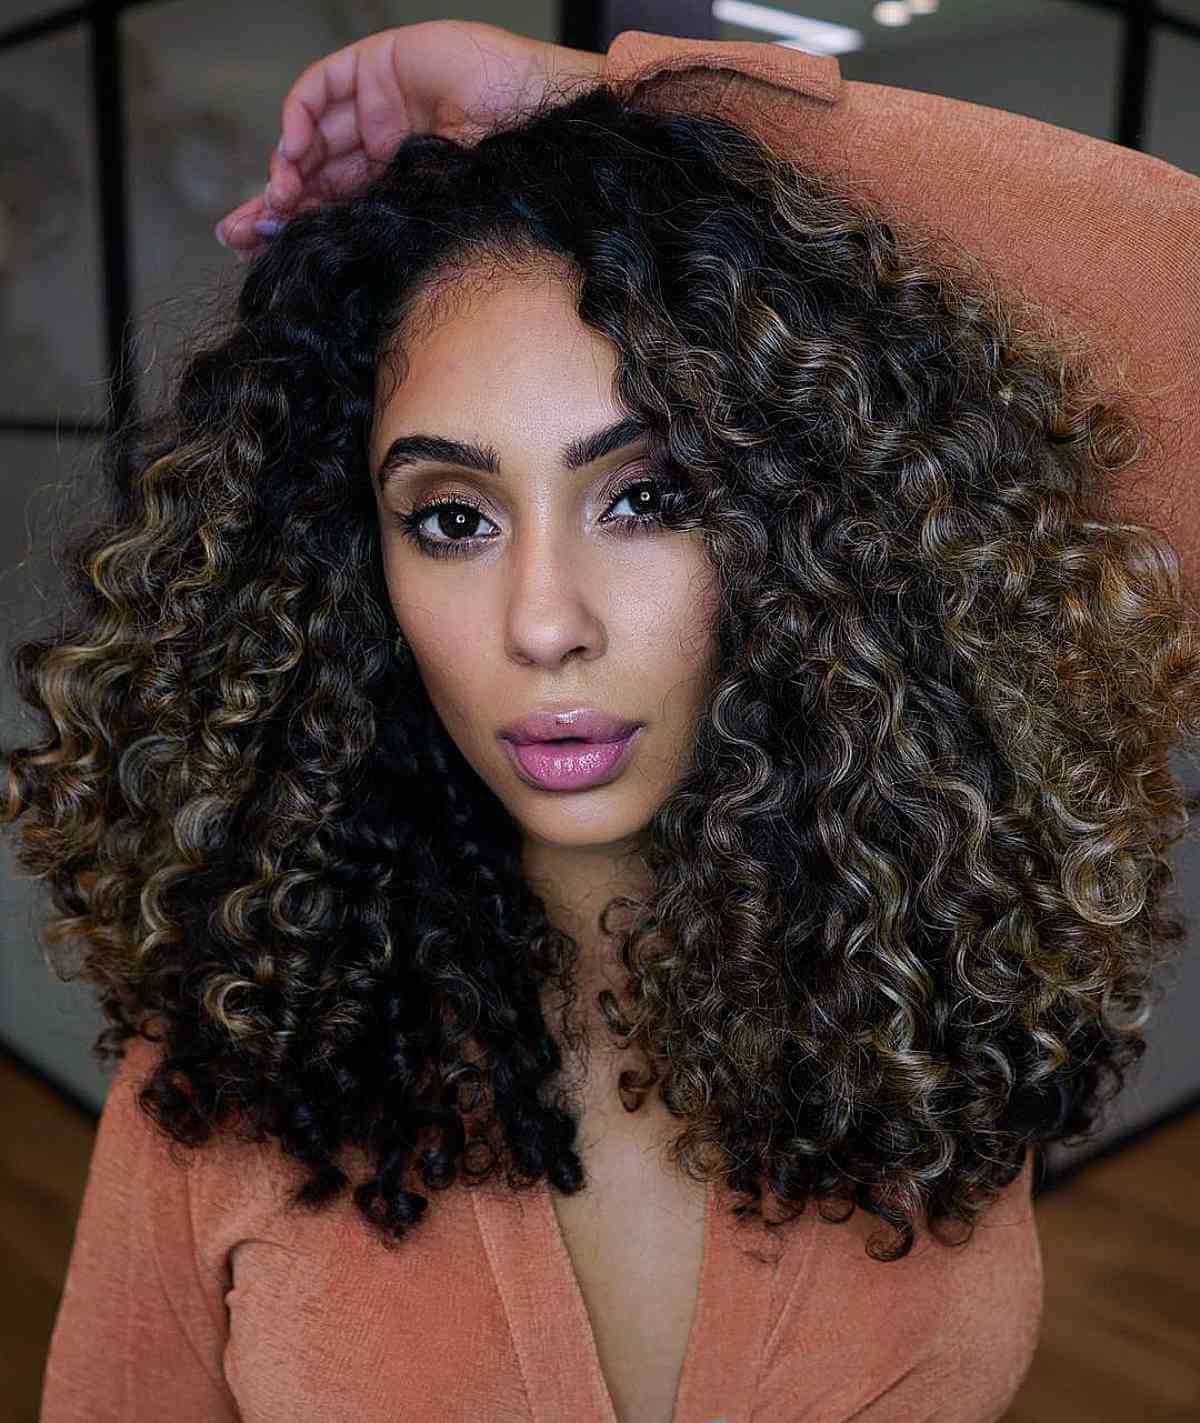 27 Ways to Get Brown Highlights on Black Hair for Stunning Dimension